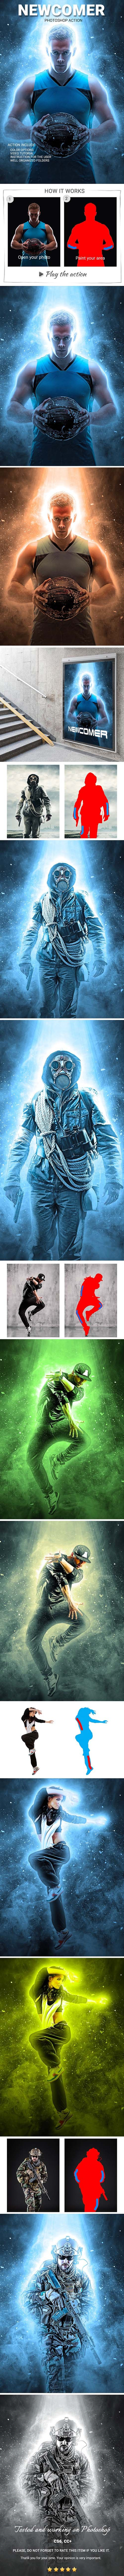 GraphicRiver - Newcomer Photoshop Action - 22692787